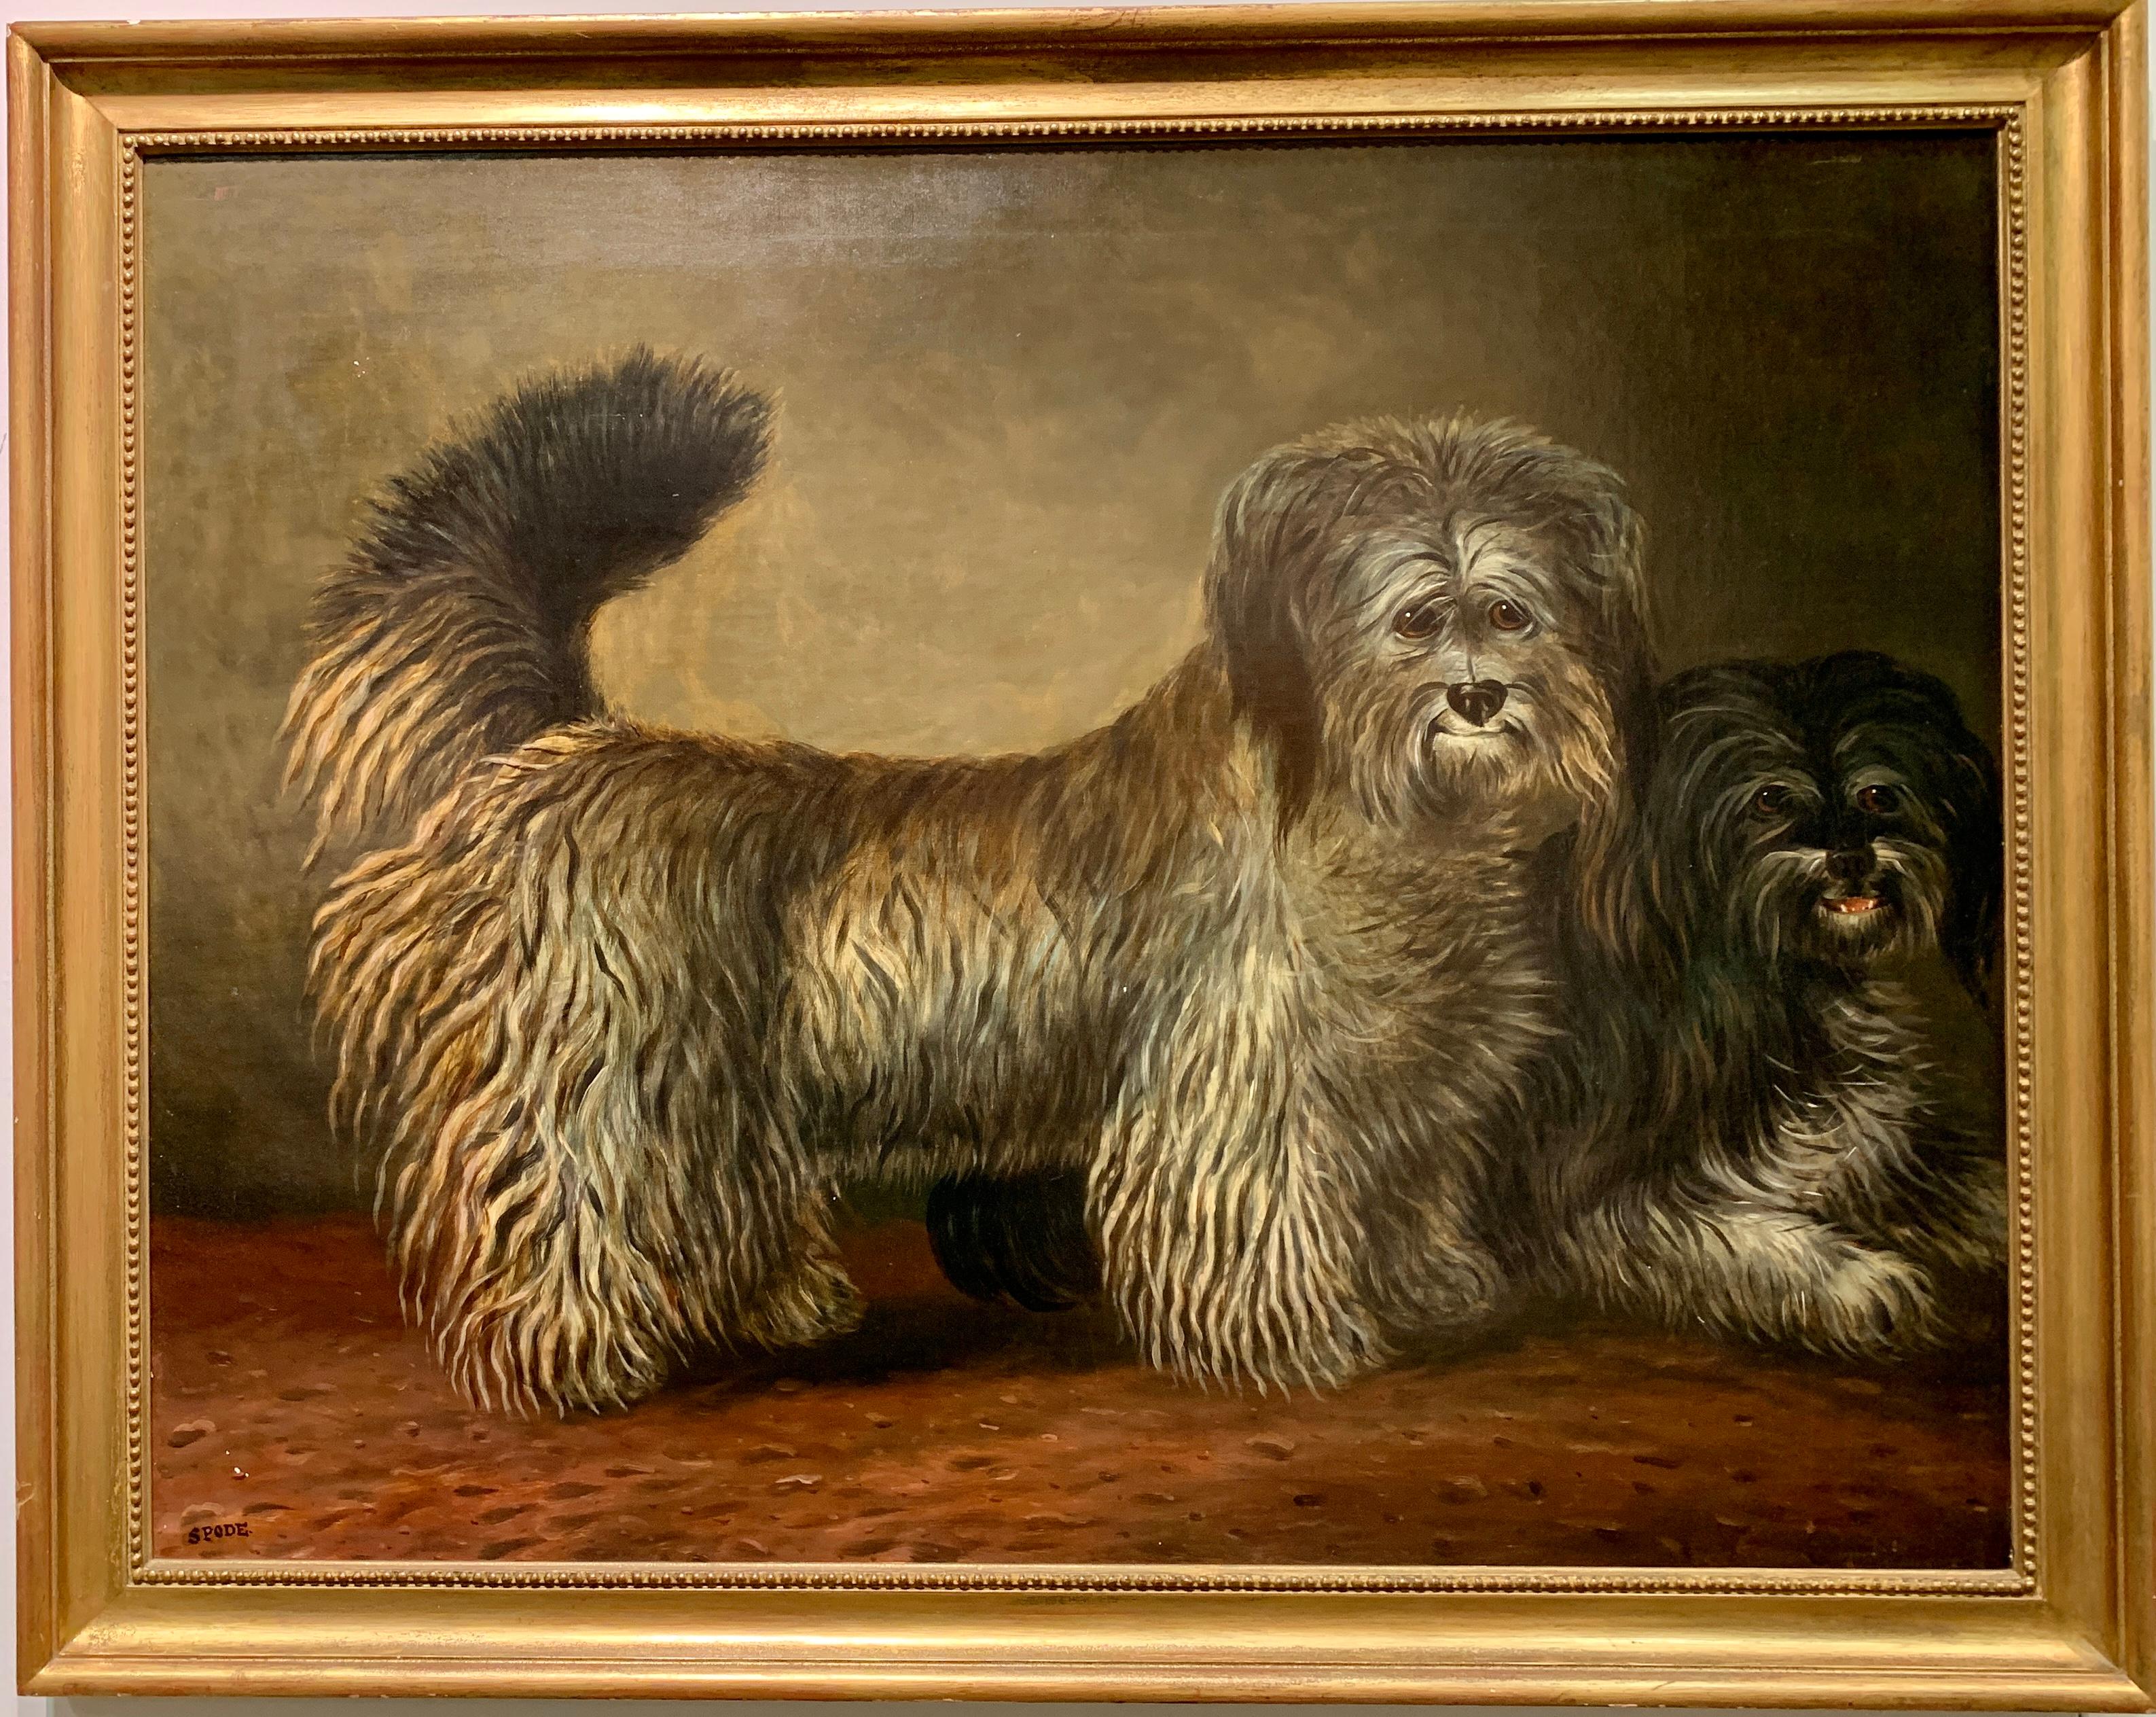 19th century Irish or English Antique portrait of two dogs, waterdogs